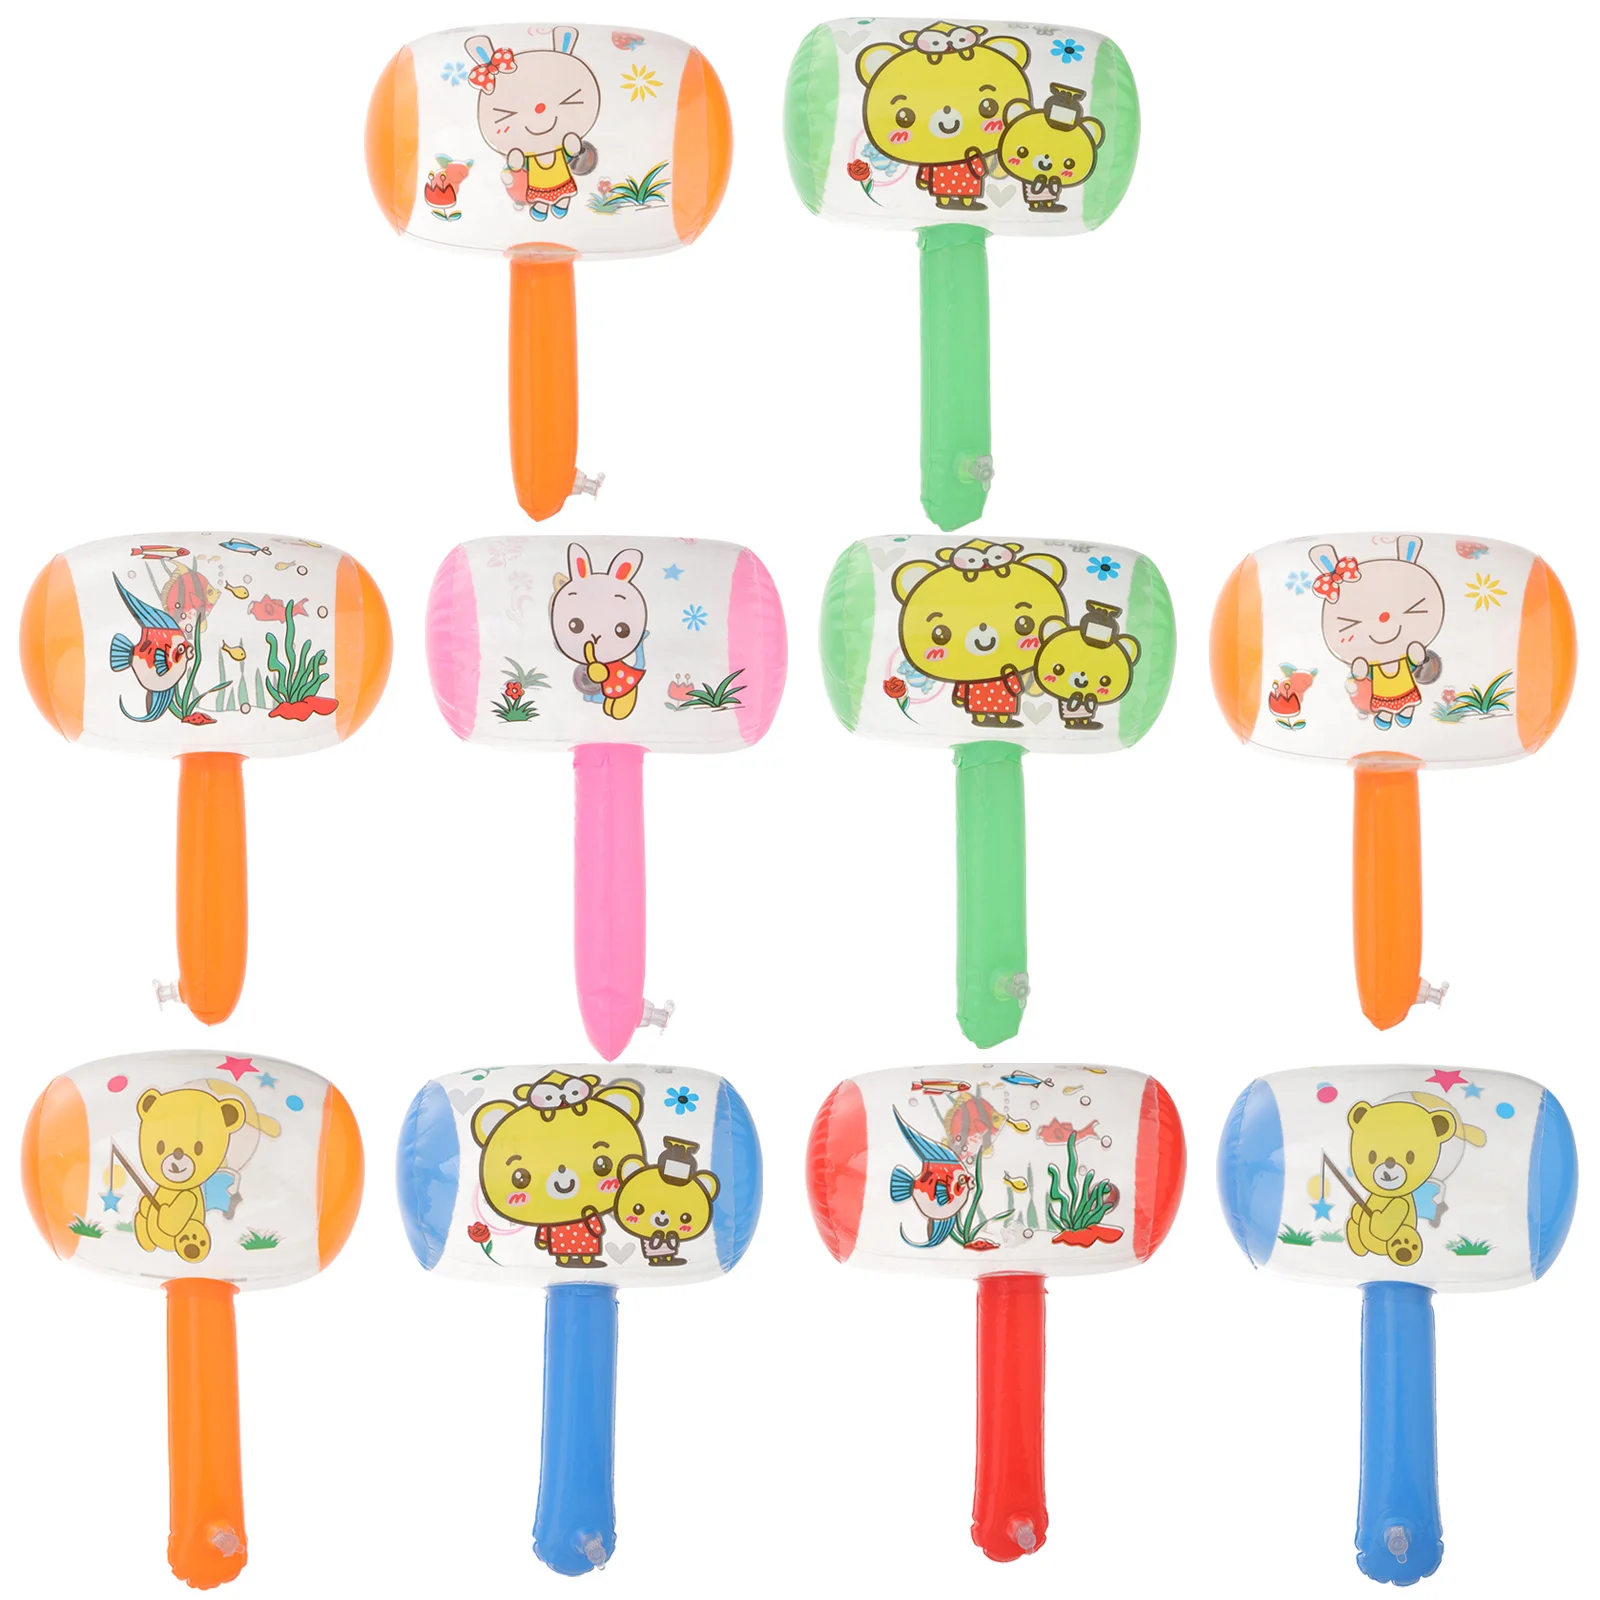 Toys Baby Hand Grip Toy Plastic Hammers Toys Kids Party Decorations  Construction Party Supplies Birthday Party Favors 12ps unicorn party plastic headband unicorn birthday party decorations kids gfits baby shower decorations wedding christmas gift